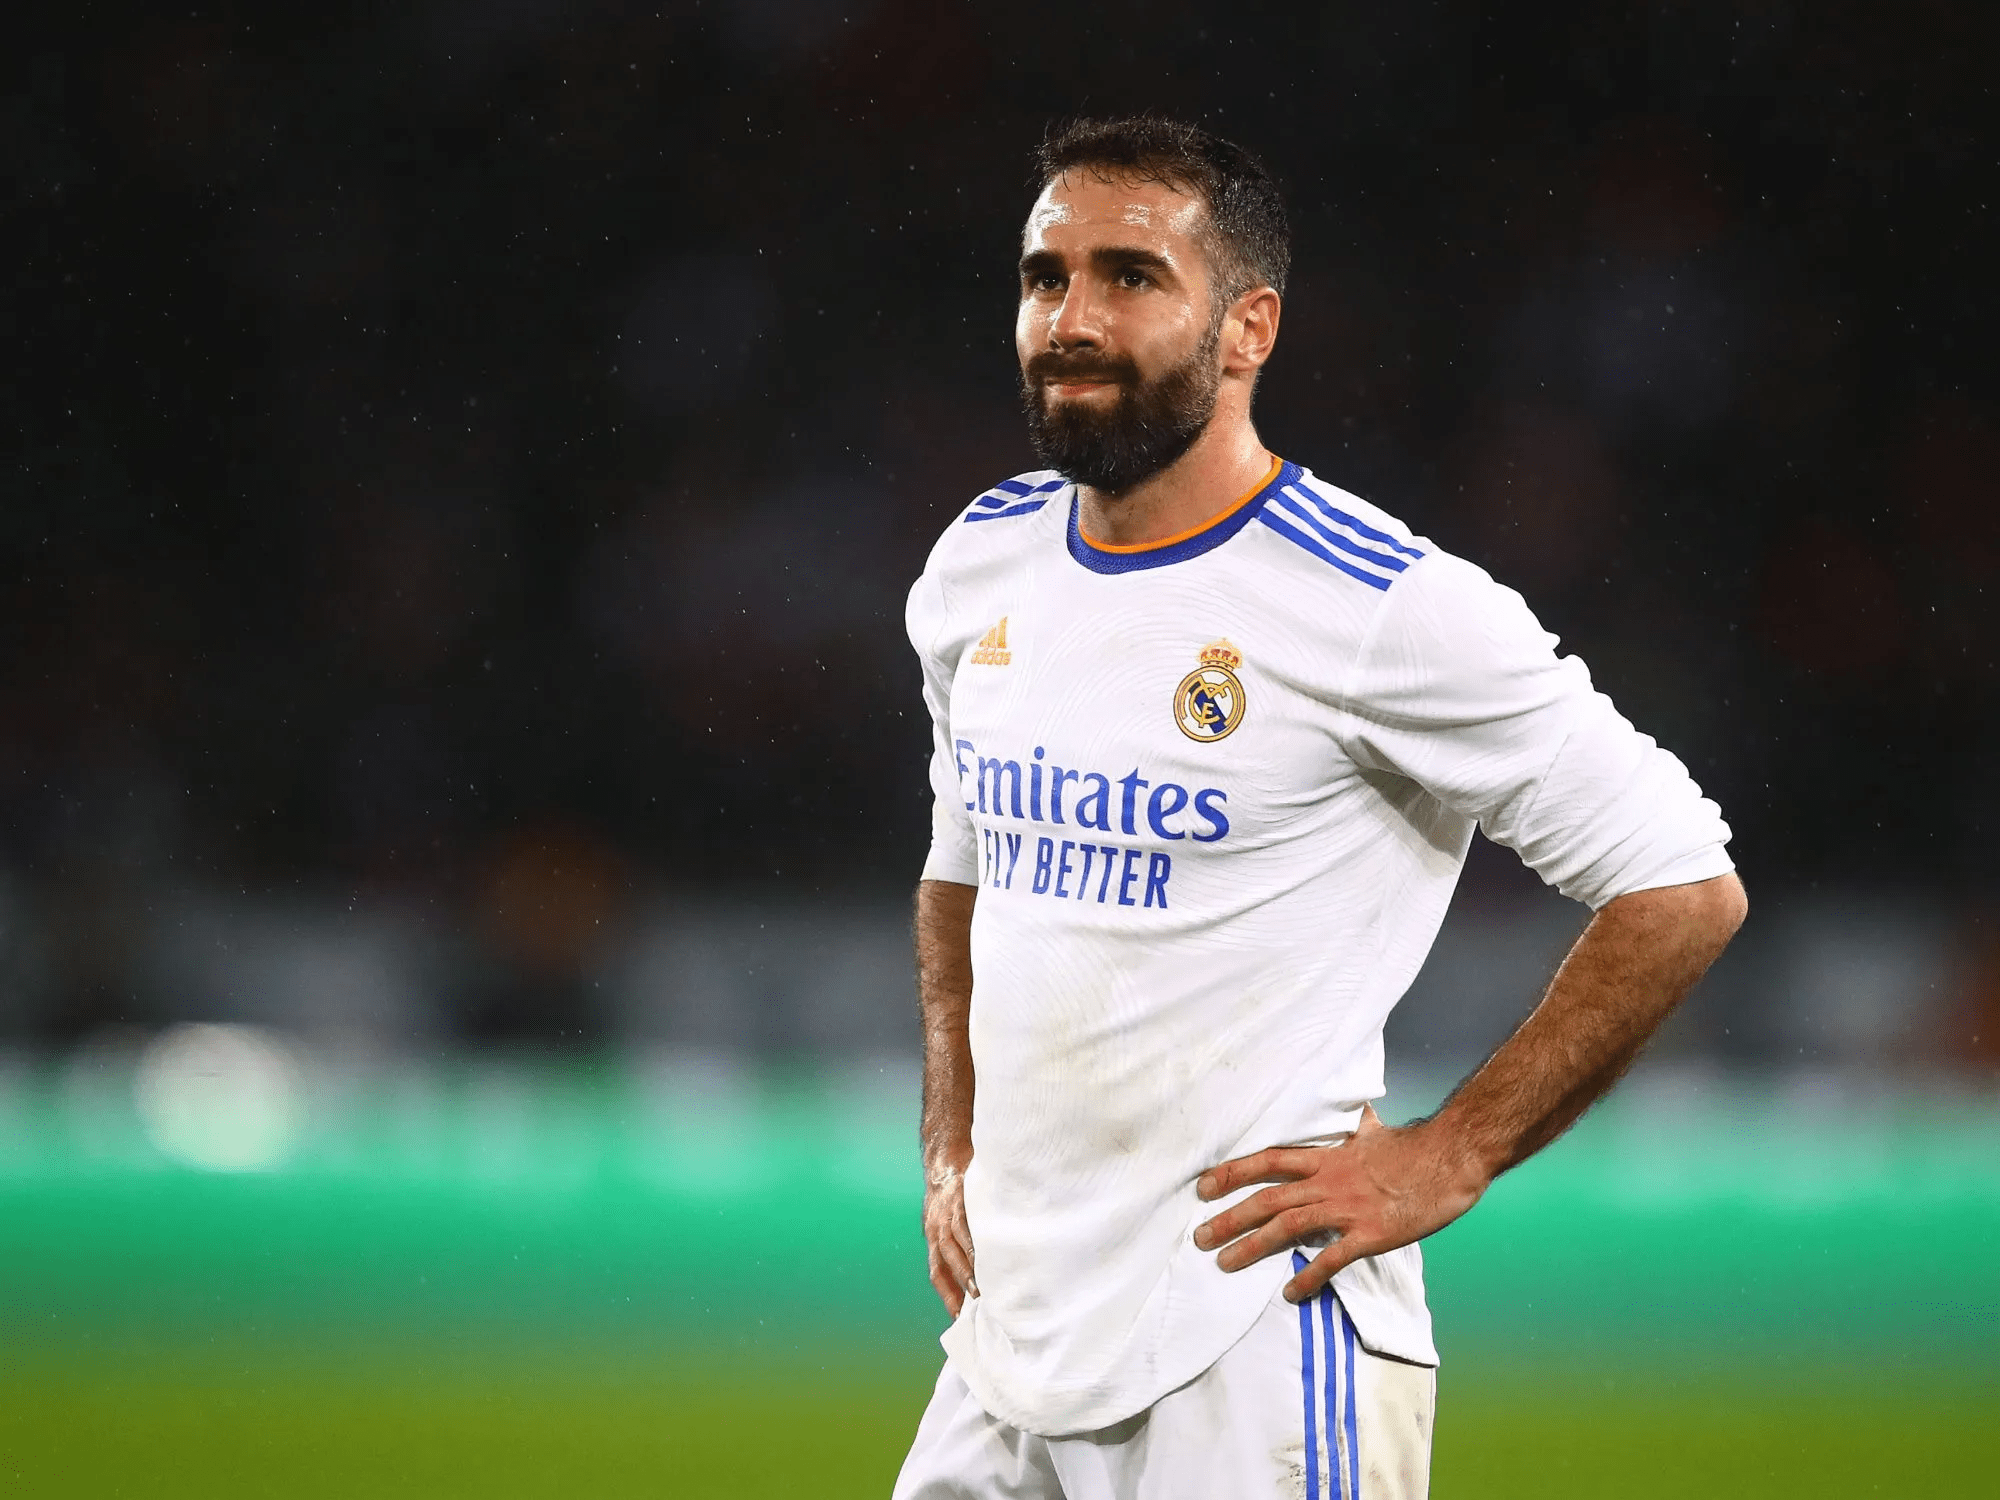 Real Madrid follow young talent as Carvajal's replacement
